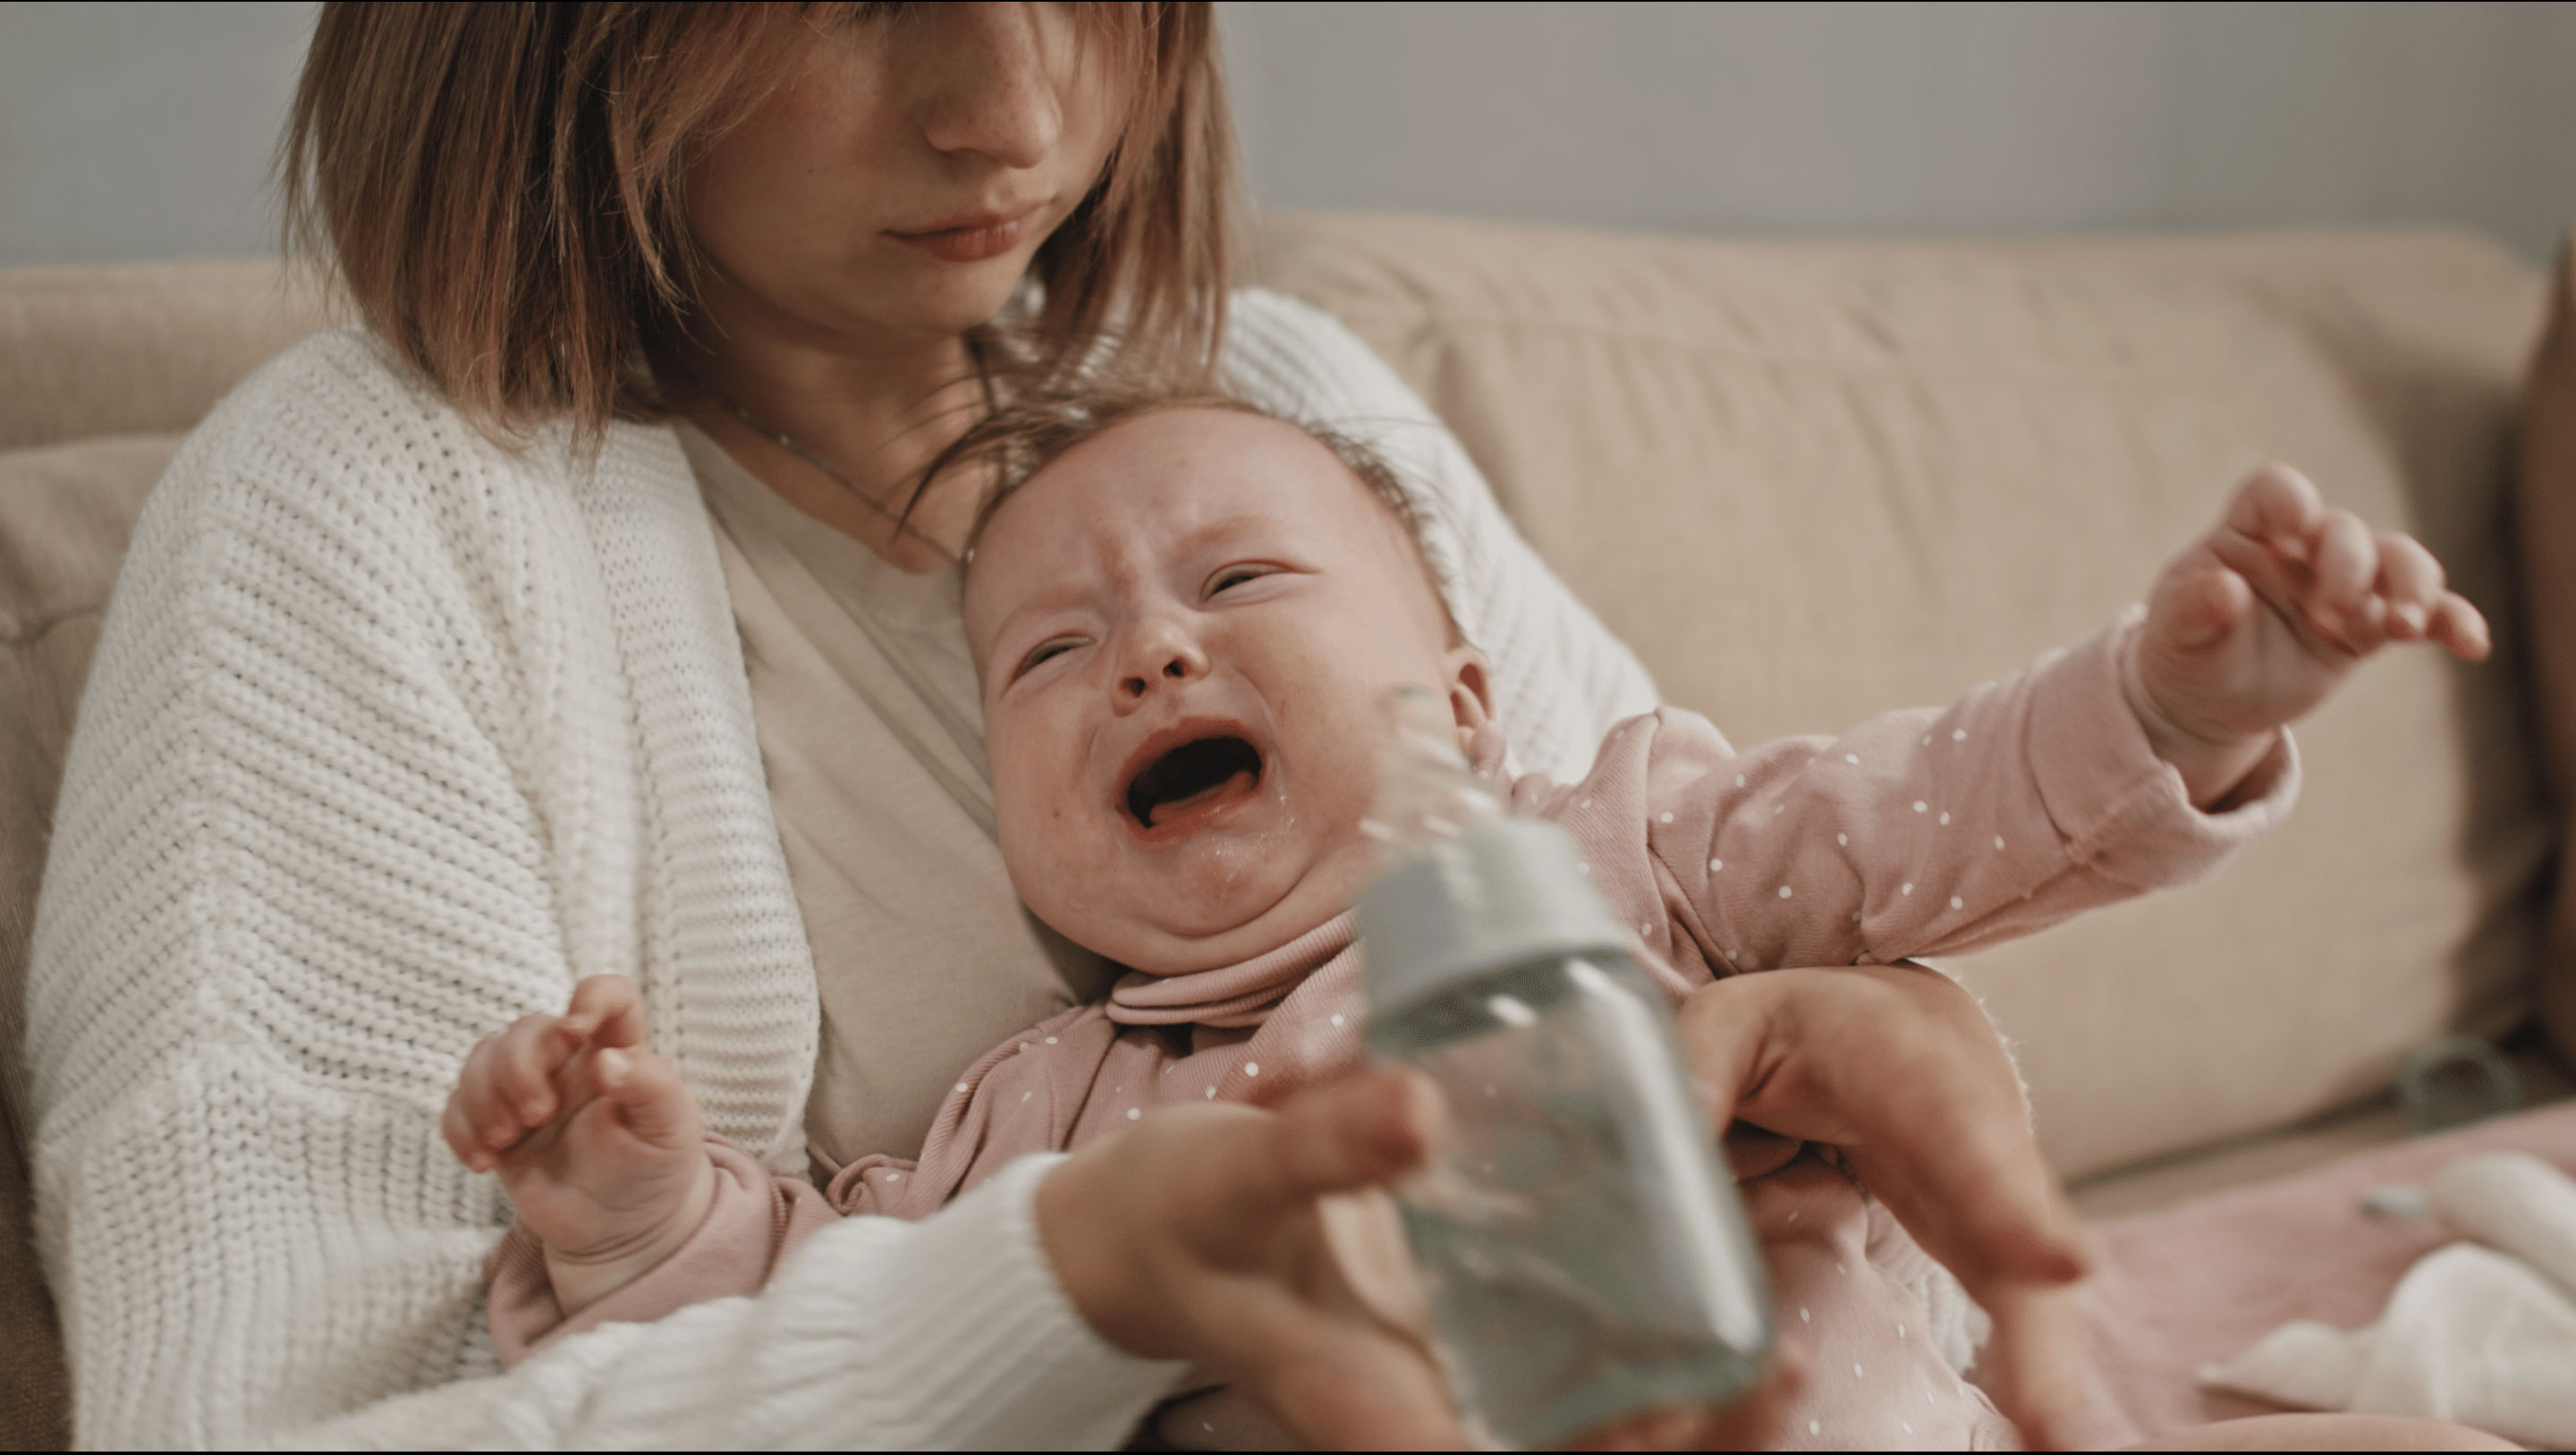 crying baby with eating difficulty